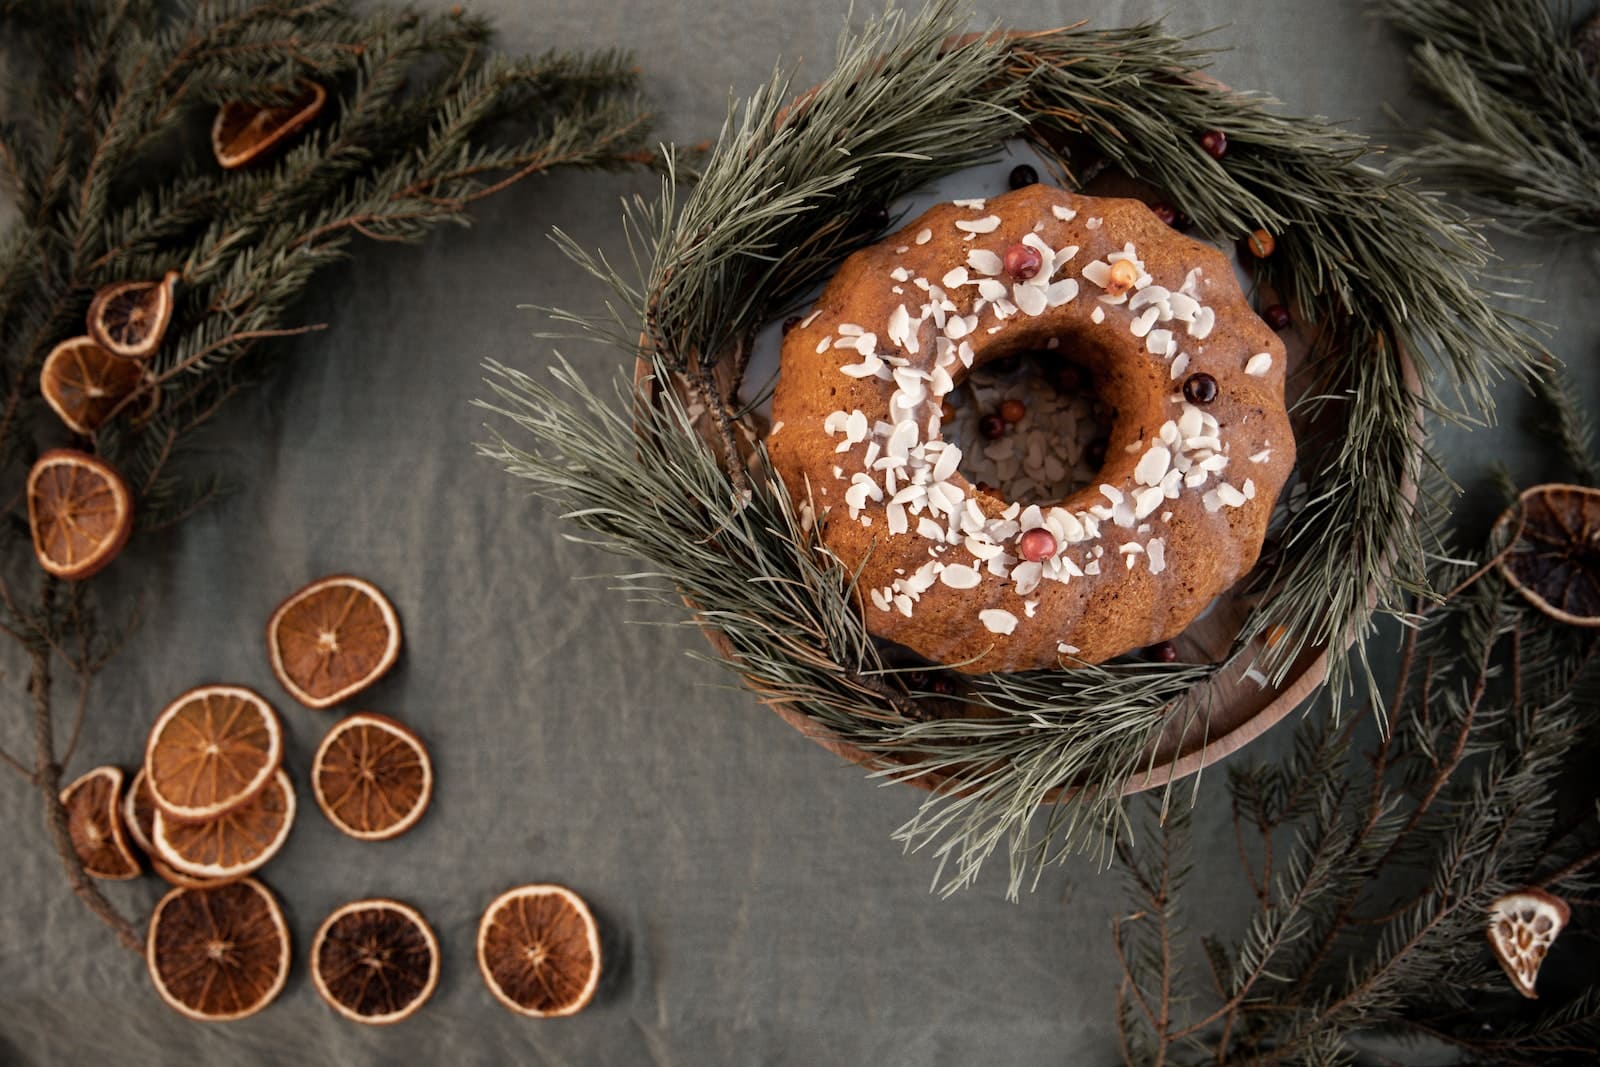 Bundt Cake on Wooden Plate with Pine Leaves